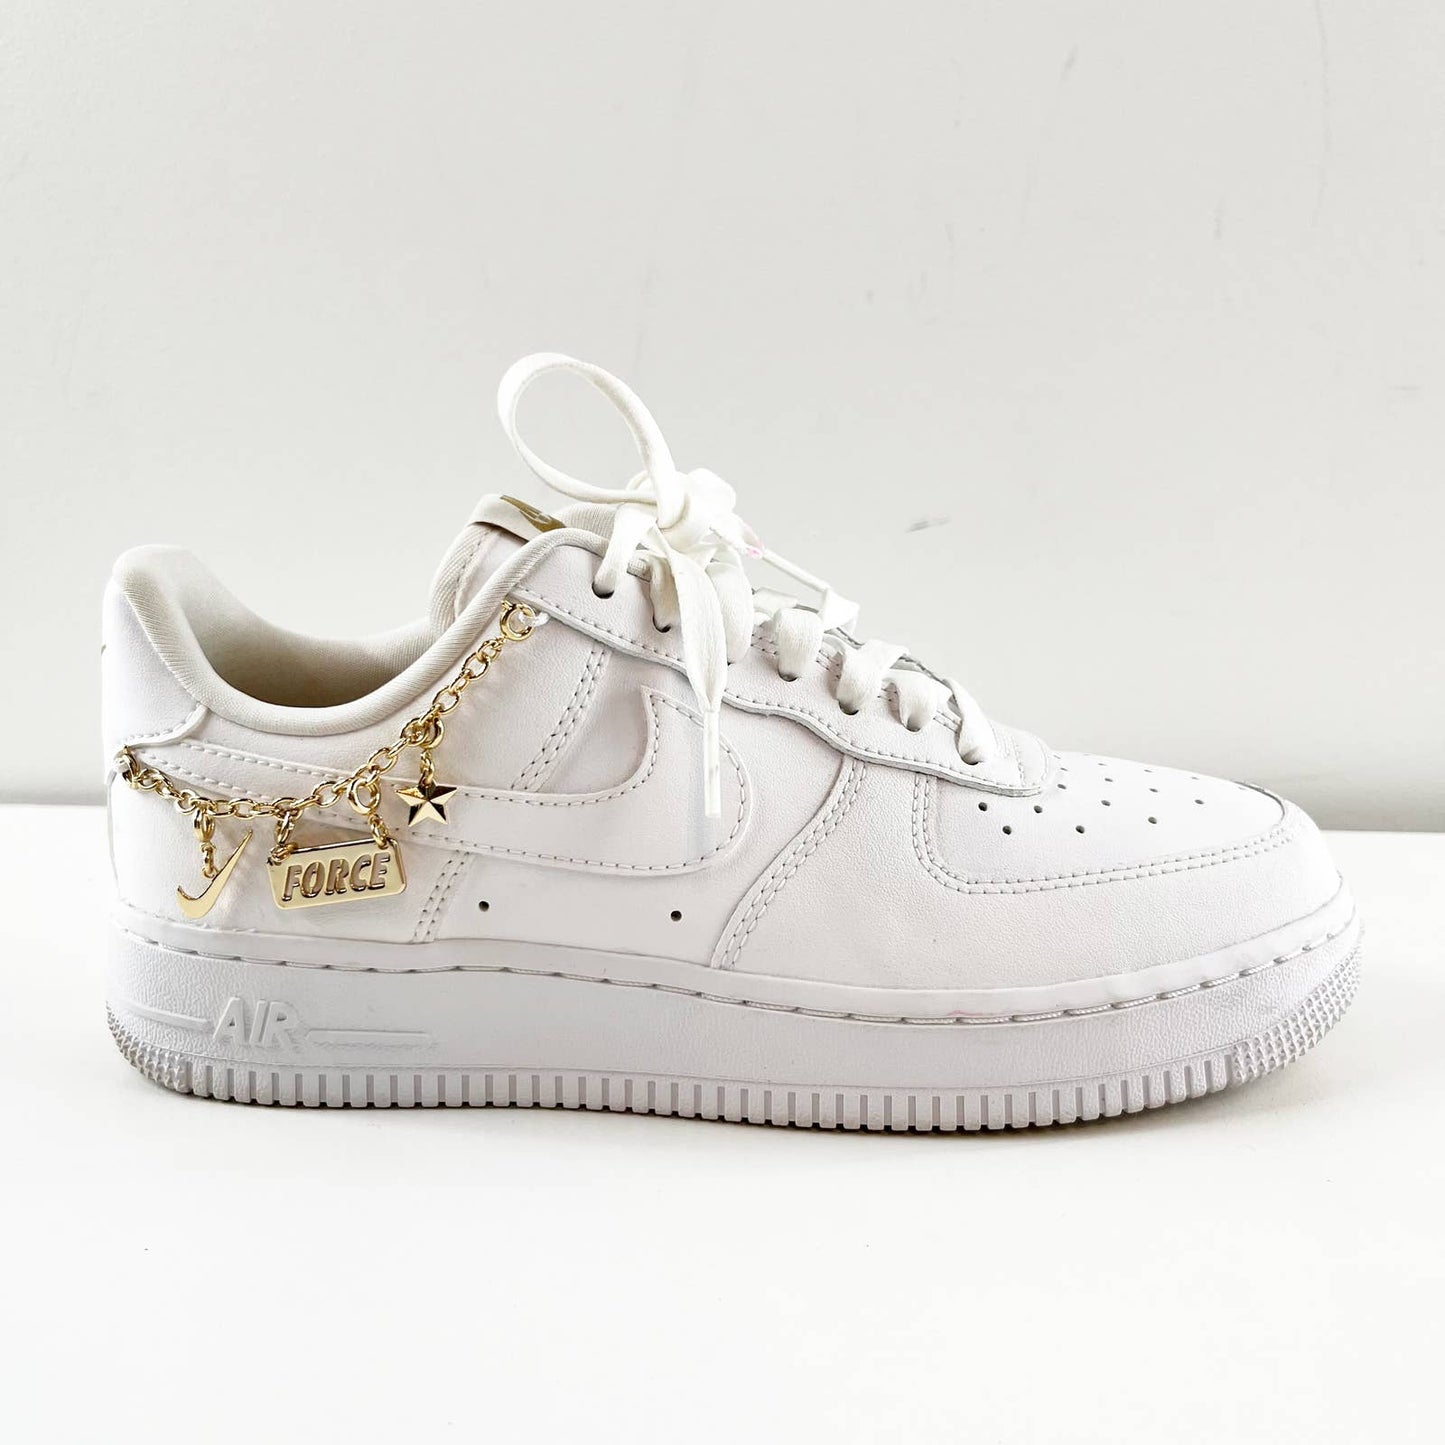 Nike Air Force 1 '07 LX Lucky Charms Court Shoe Sneakers White Gold 7